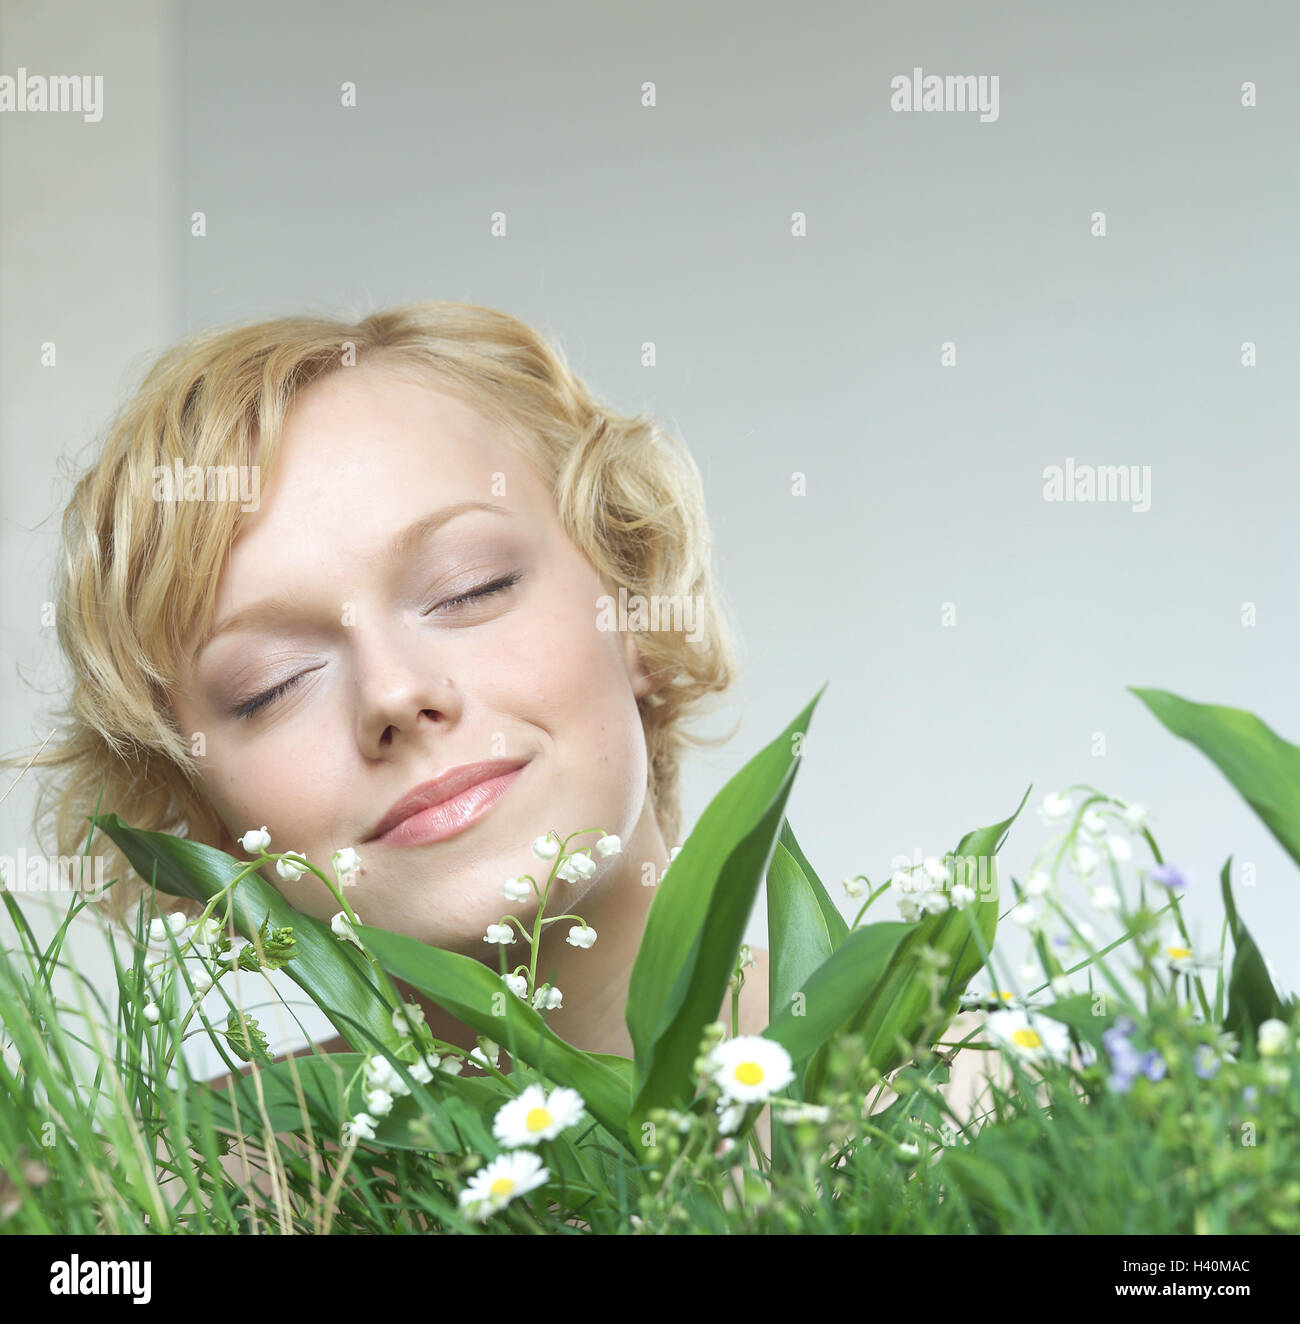 Woman, spring flowers, smell, odour, pleasant sensation, consumption, season, spring, nature, flowers, lilies of the valley, smell, enjoy, fragrance, pleasantly, allergy risk, allergy danger, allergy, allergically, reaction, allergens, plants, blossoms, pollings, flower pollings, polling allergy, hay fever Stock Photo